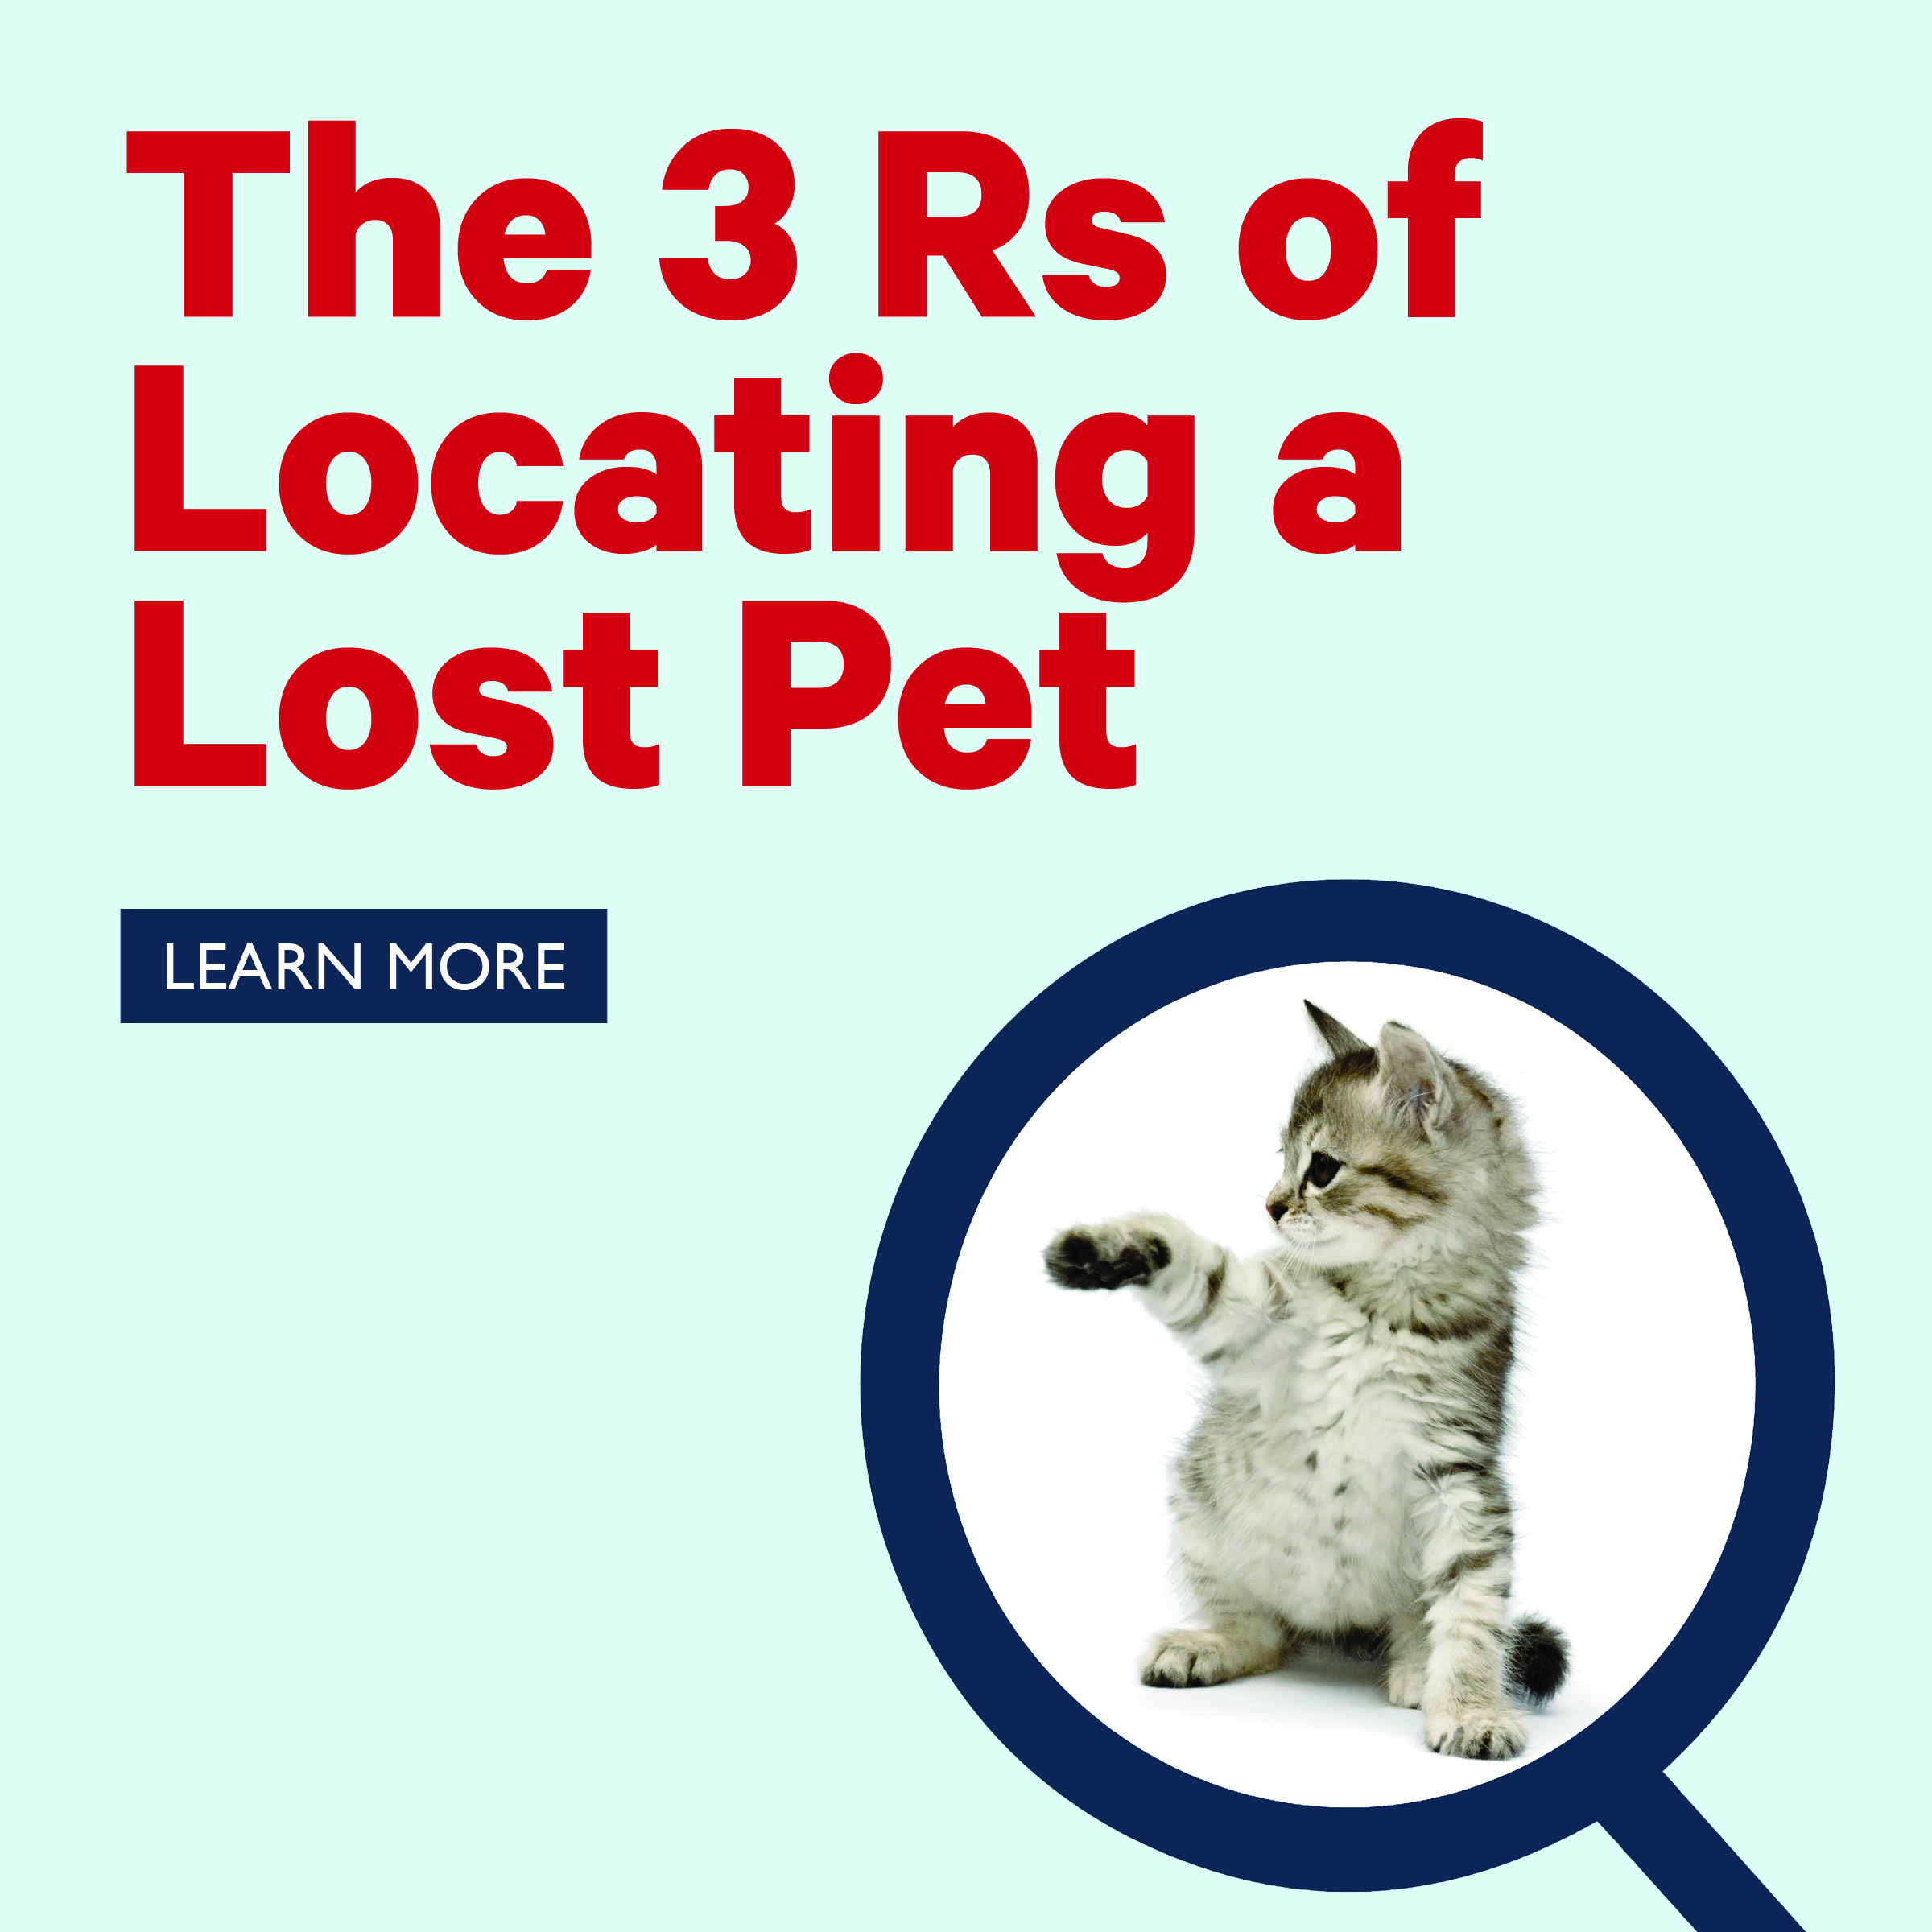 Tips for Lost Pet Recovery - PetLink